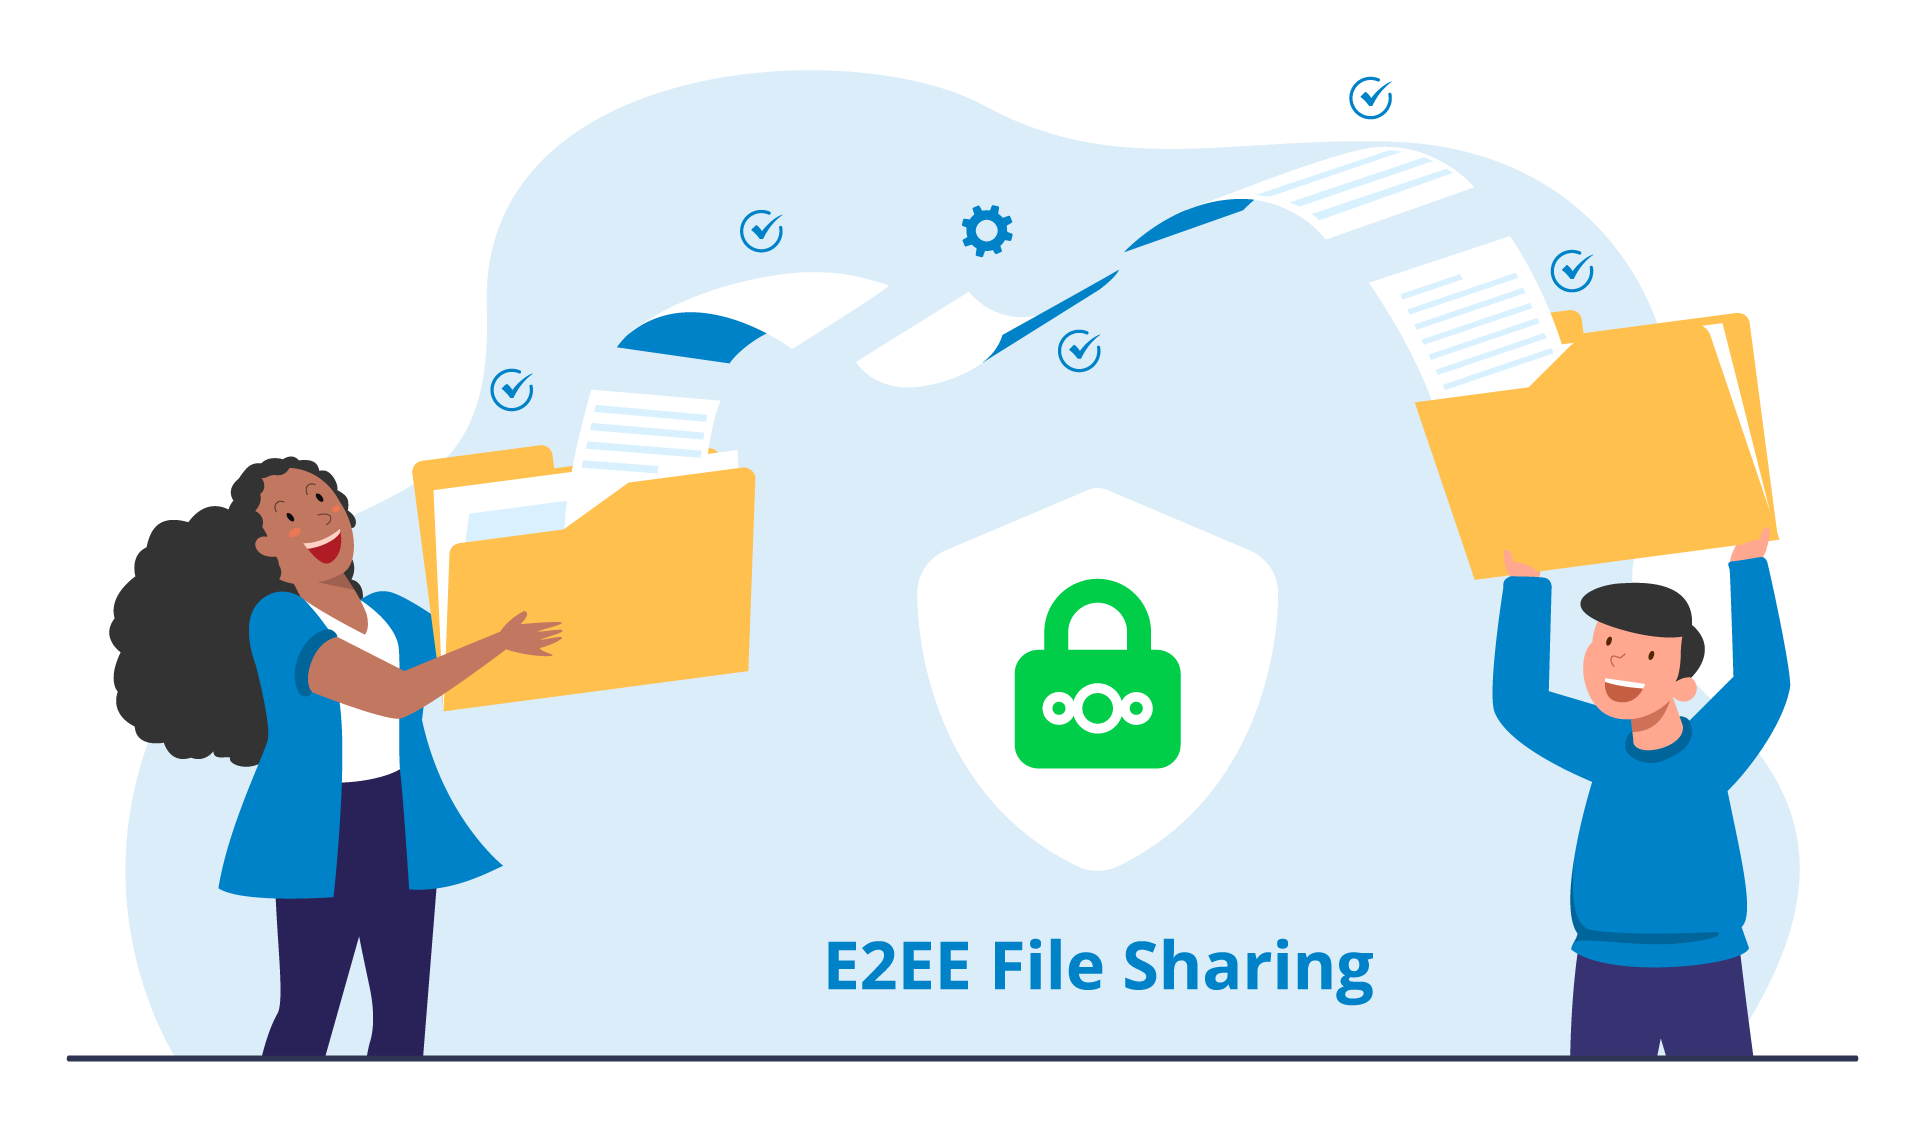 E2EE file sharing